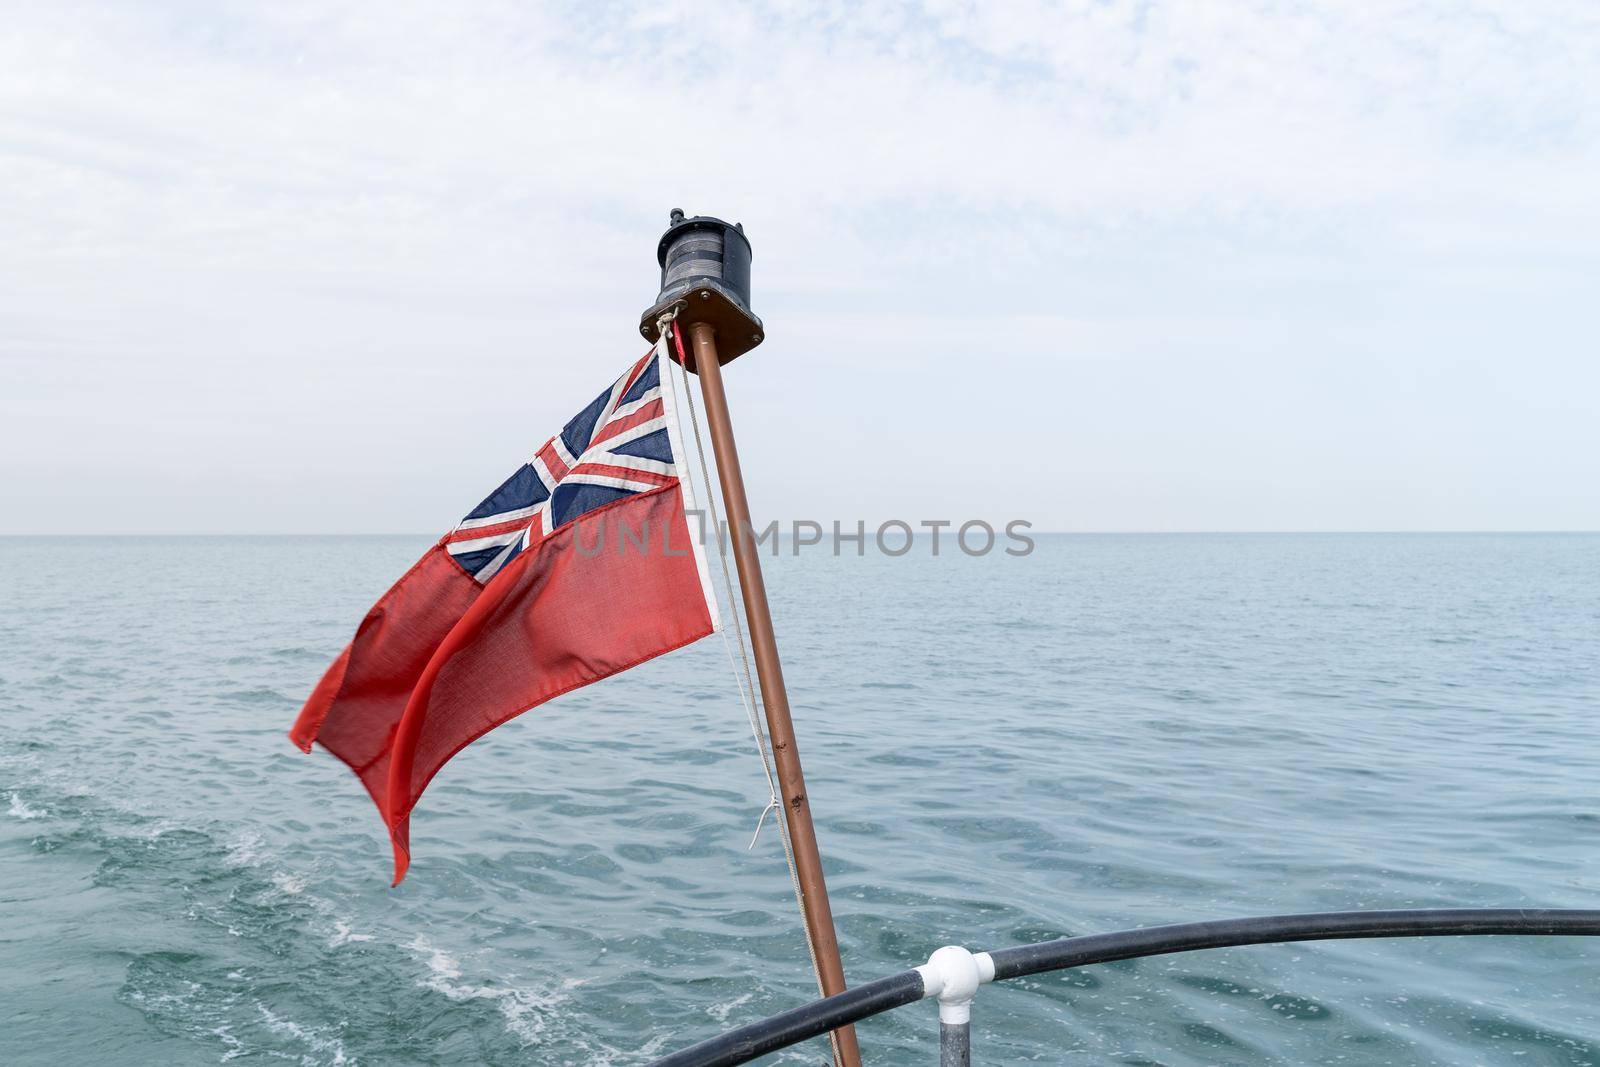 Uk red ensign the british maritime flag flown from yacht with the sea and sky behind it by LeoniekvanderVliet